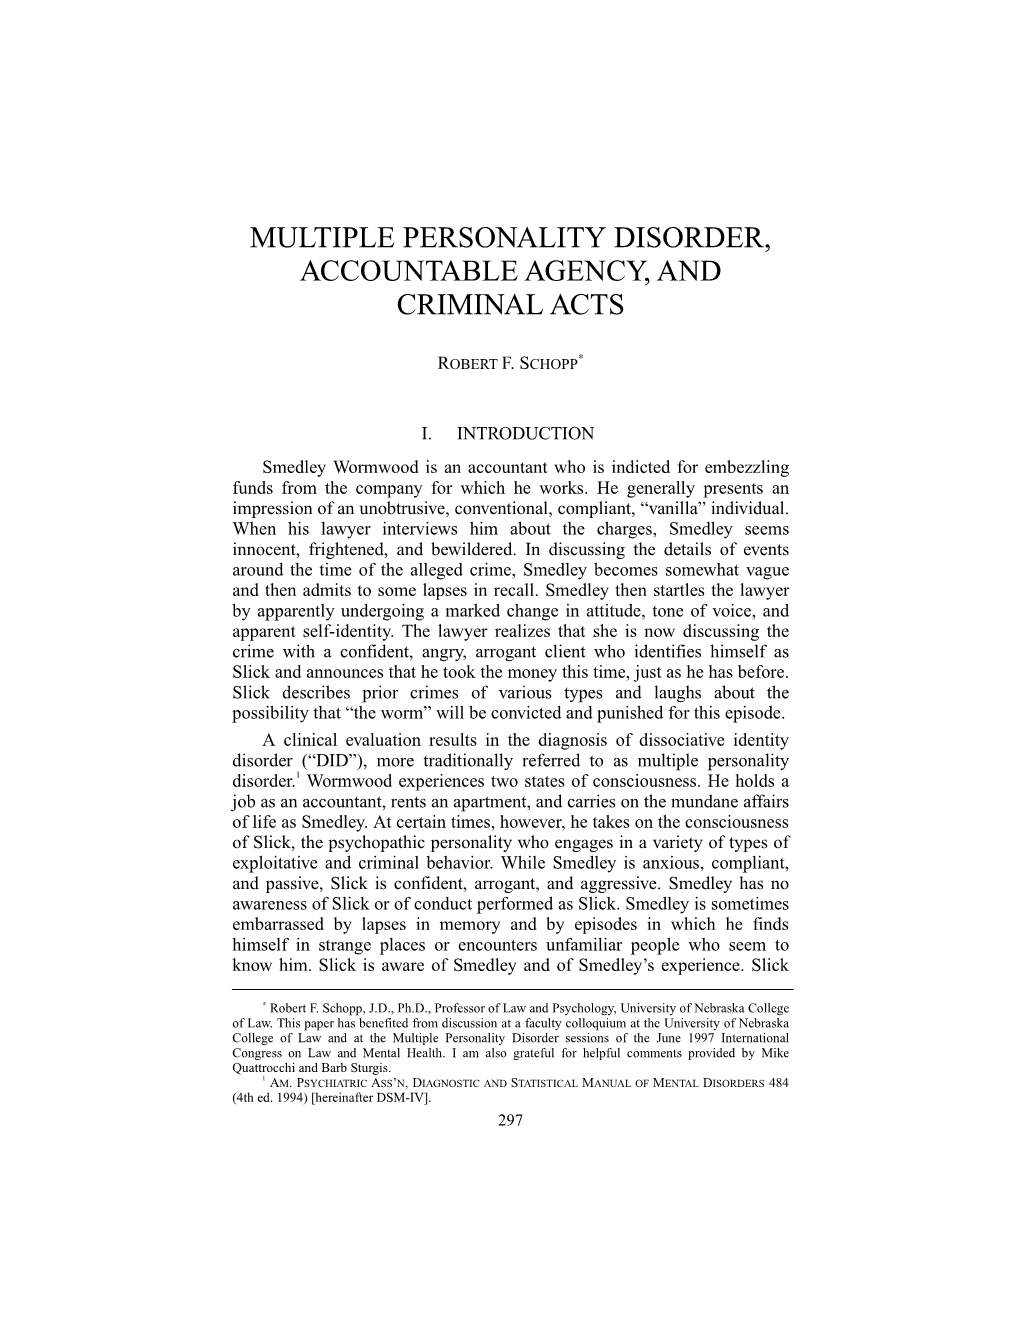 Multiple Personality Disorder, Accountable Agency, and Criminal Acts